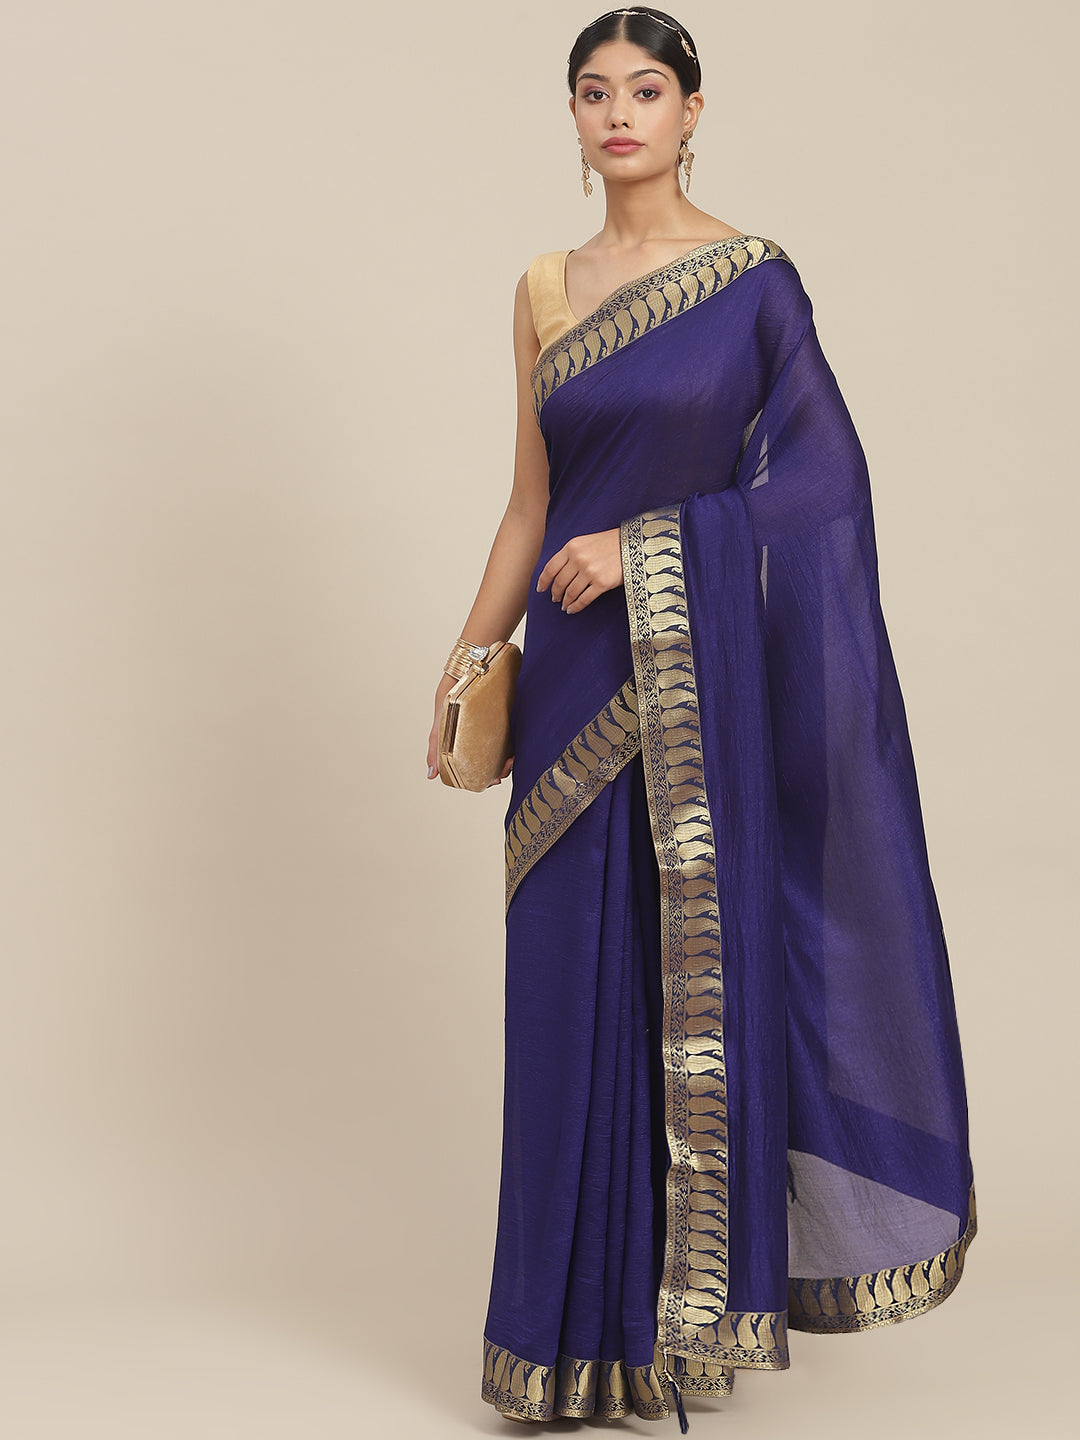 Ishin Women's Silk Blend Blue Solid Saree With Blouse Piece